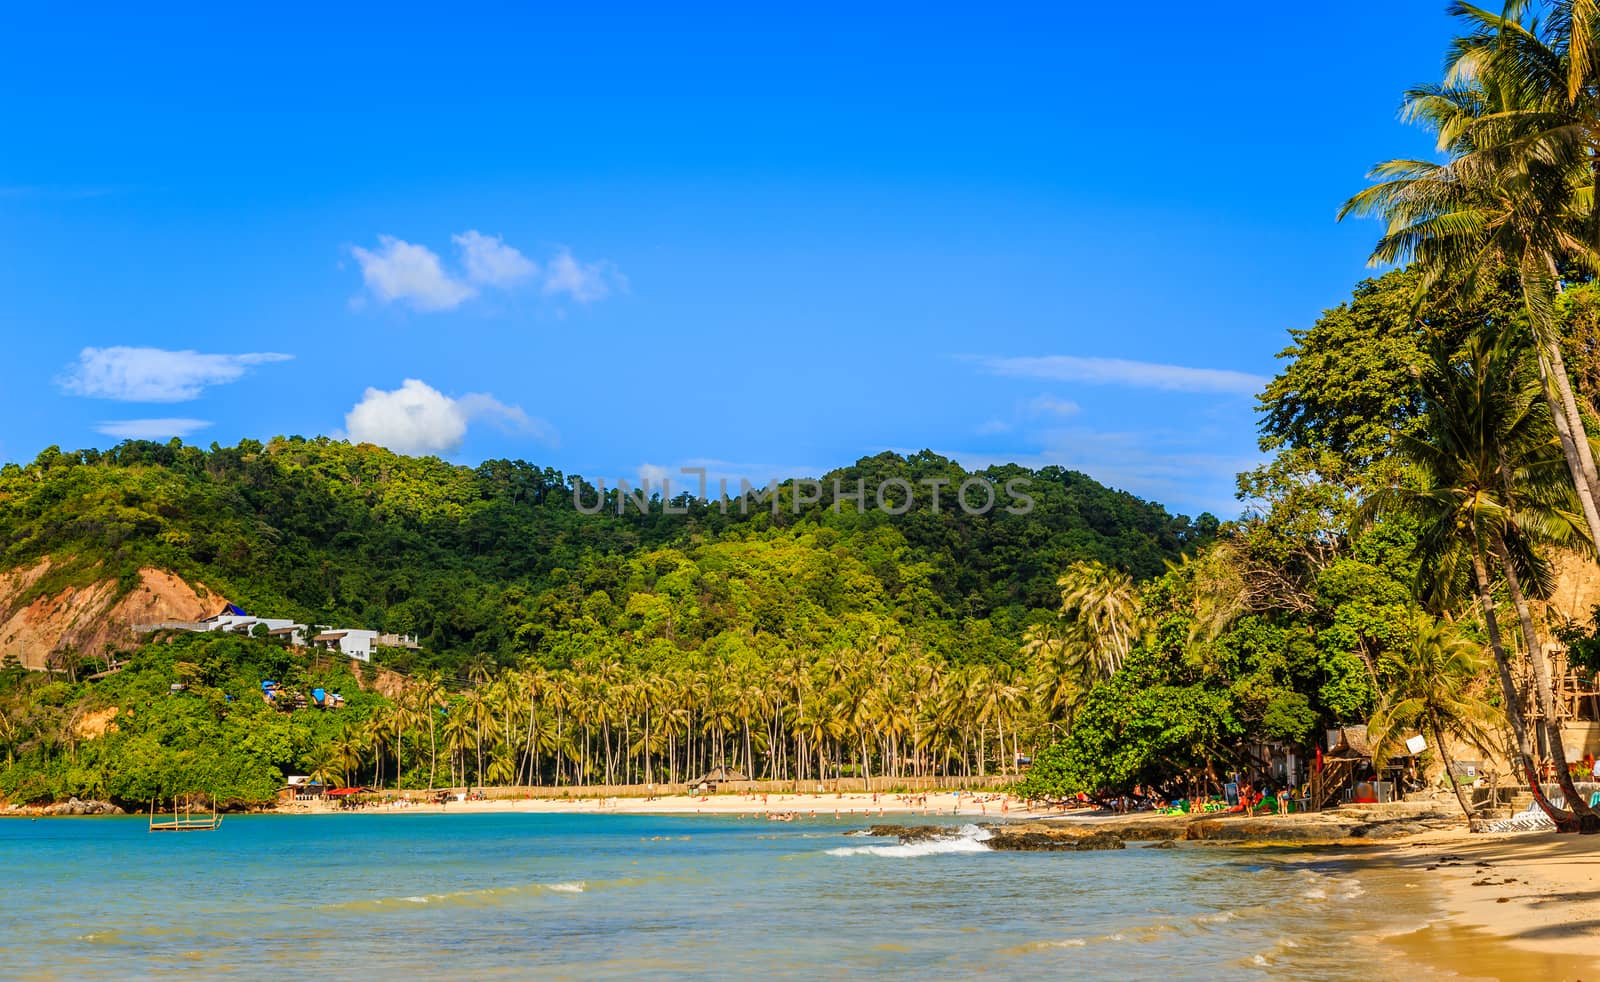 Tropical island landscape with beach and palms, Ipil beach, Pala by ambeon